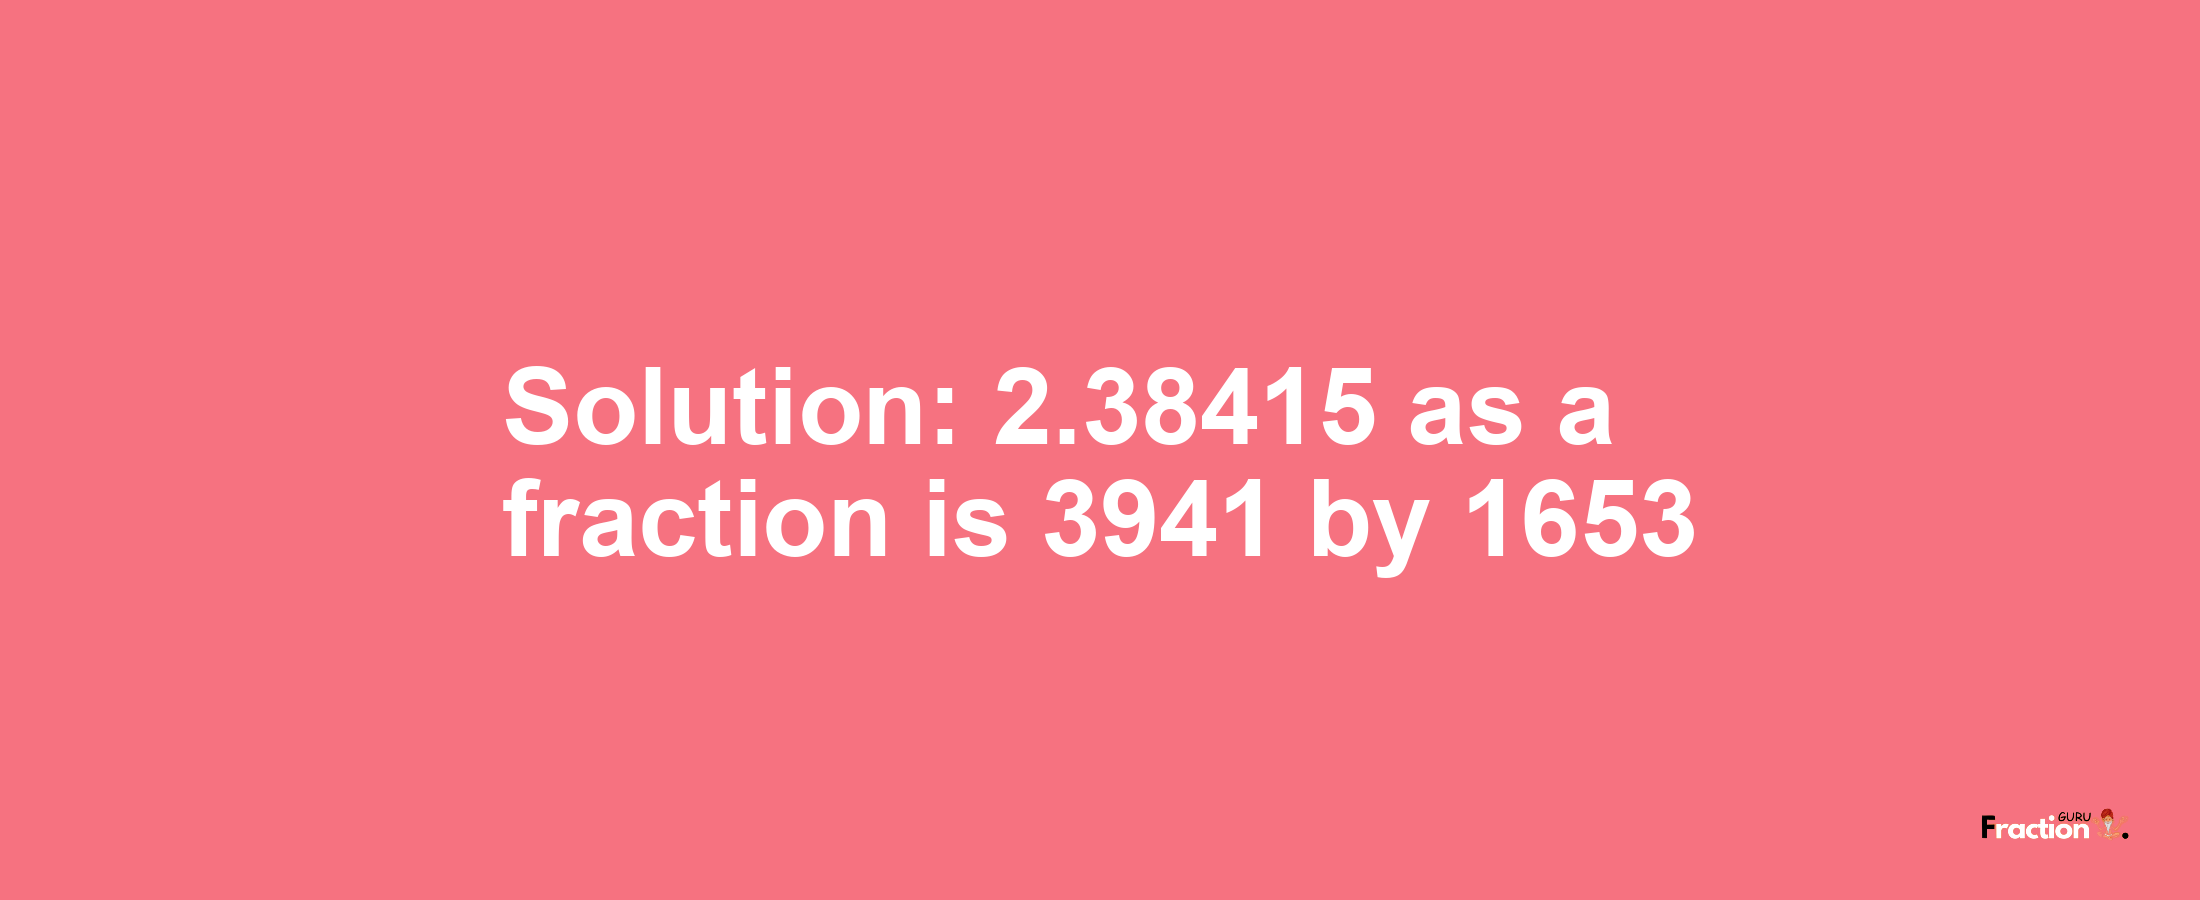 Solution:2.38415 as a fraction is 3941/1653